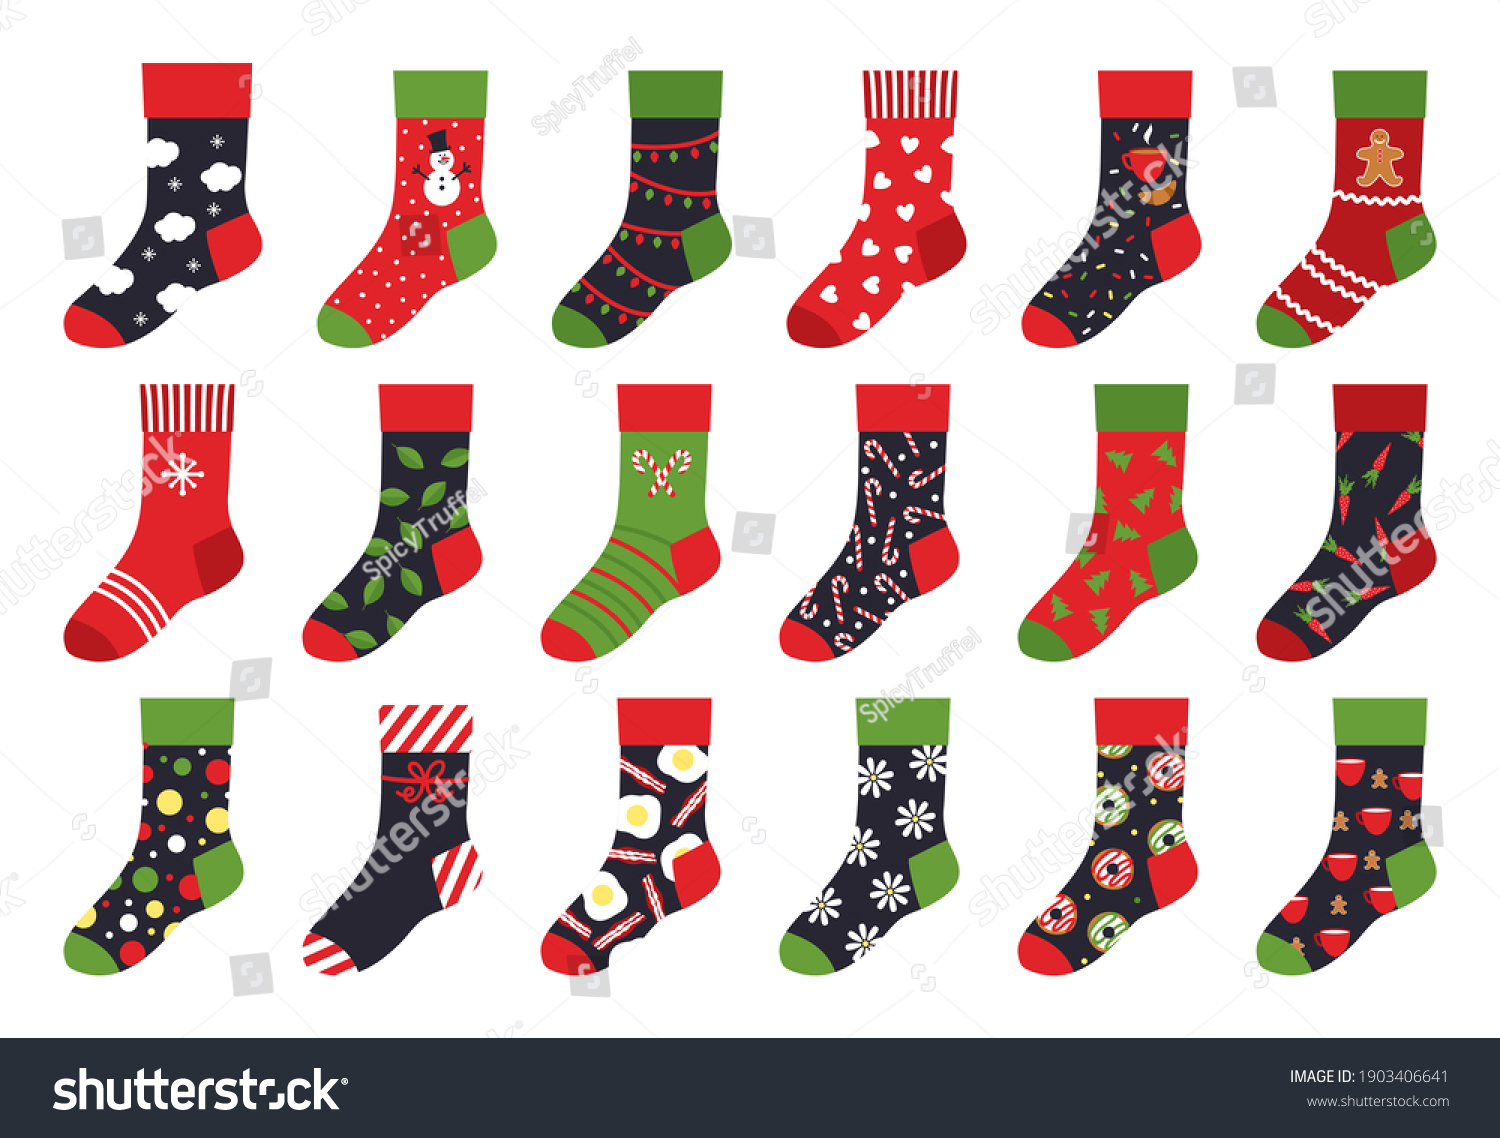 249,379 Stocking Images, Stock Photos & Vectors | Shutterstock